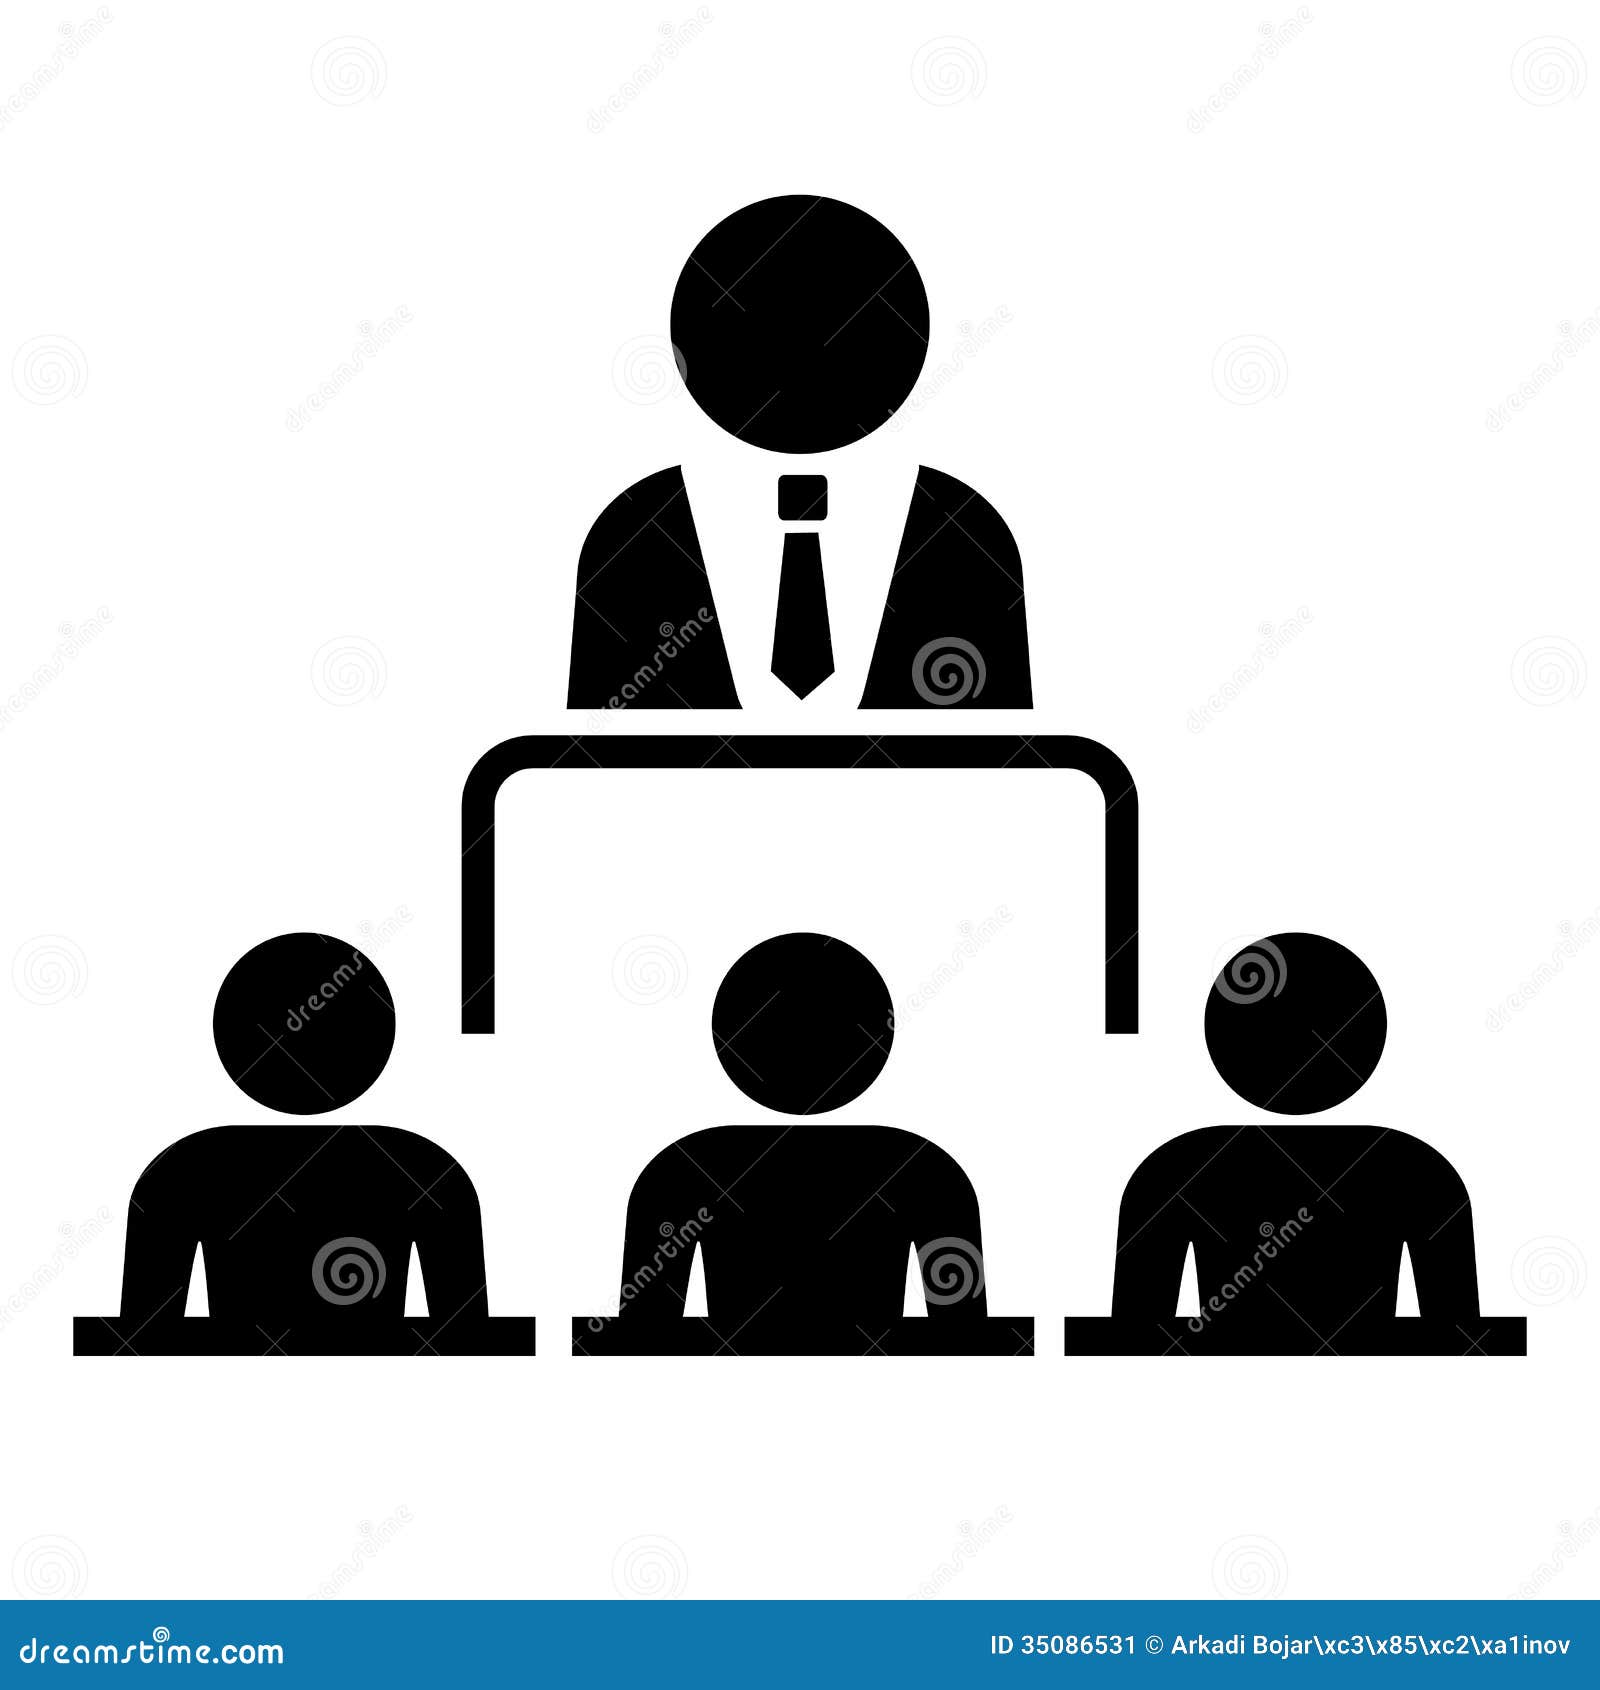 conference room clipart - photo #47